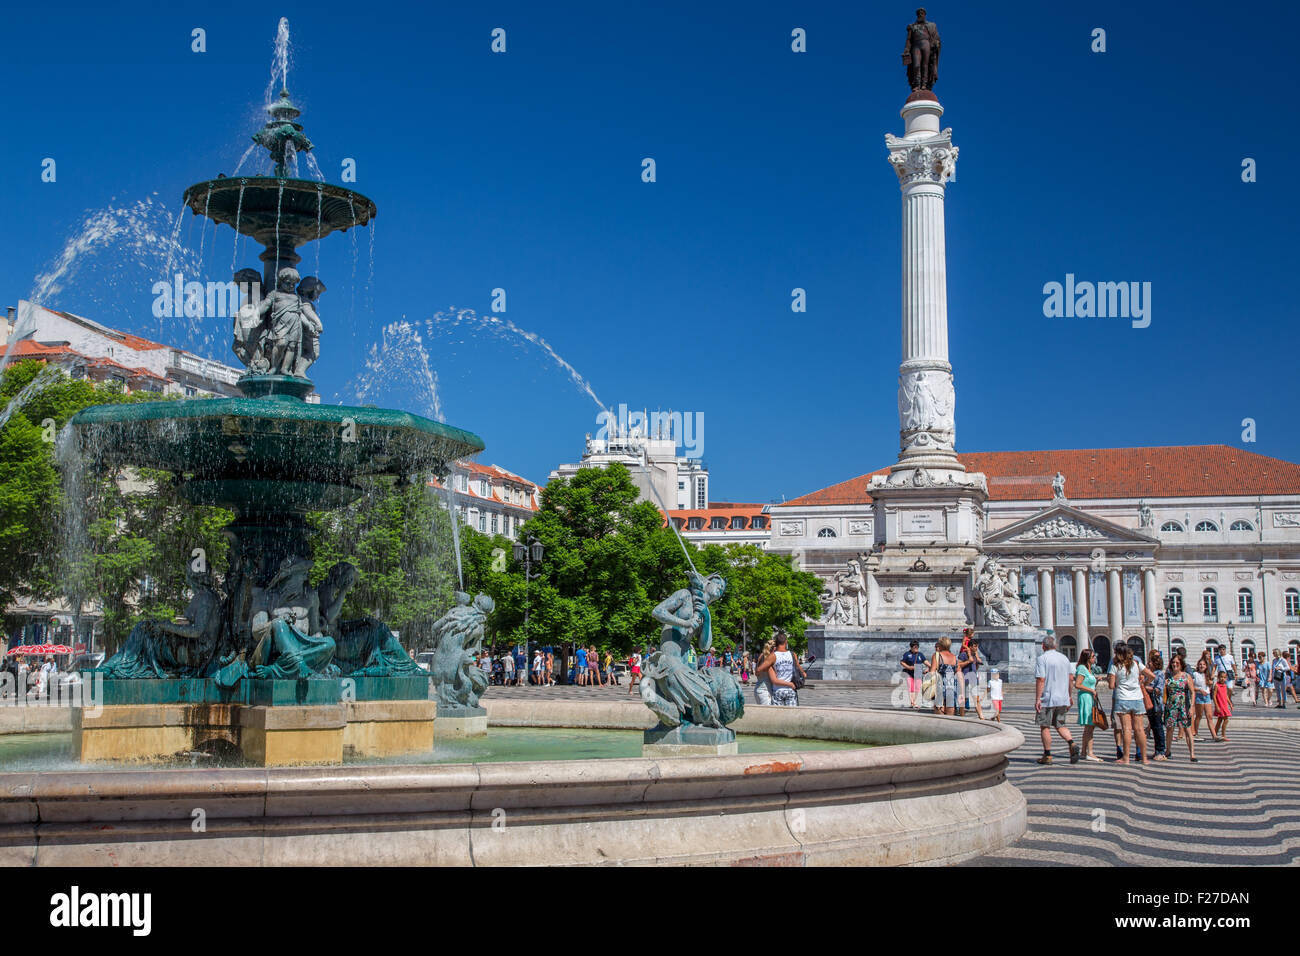 Place du Rossio, Praca Dom Pedro, fountain, column and National Theatre, Lisbon, Portugal Stock Photo